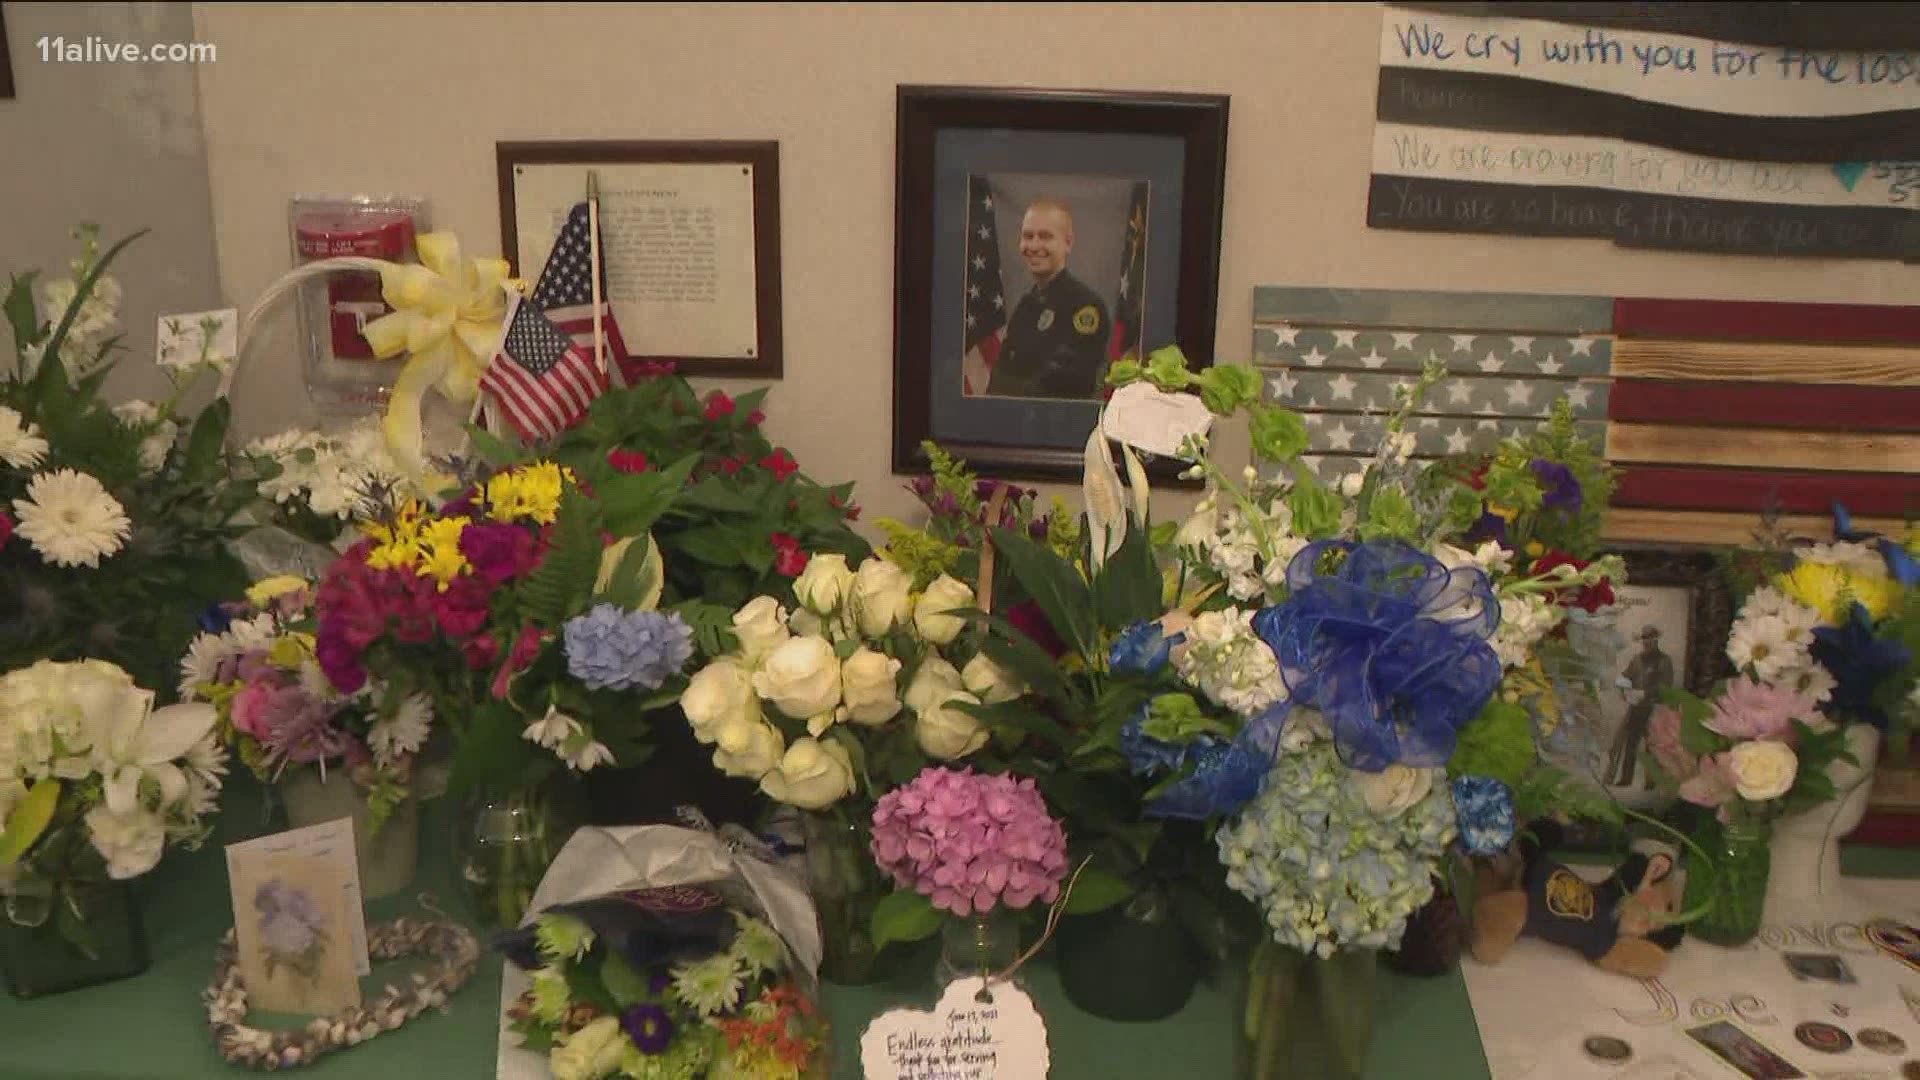 Family, friends, and fellow officers will gather for to honor the Holly Springs officer killed in the line of duty.